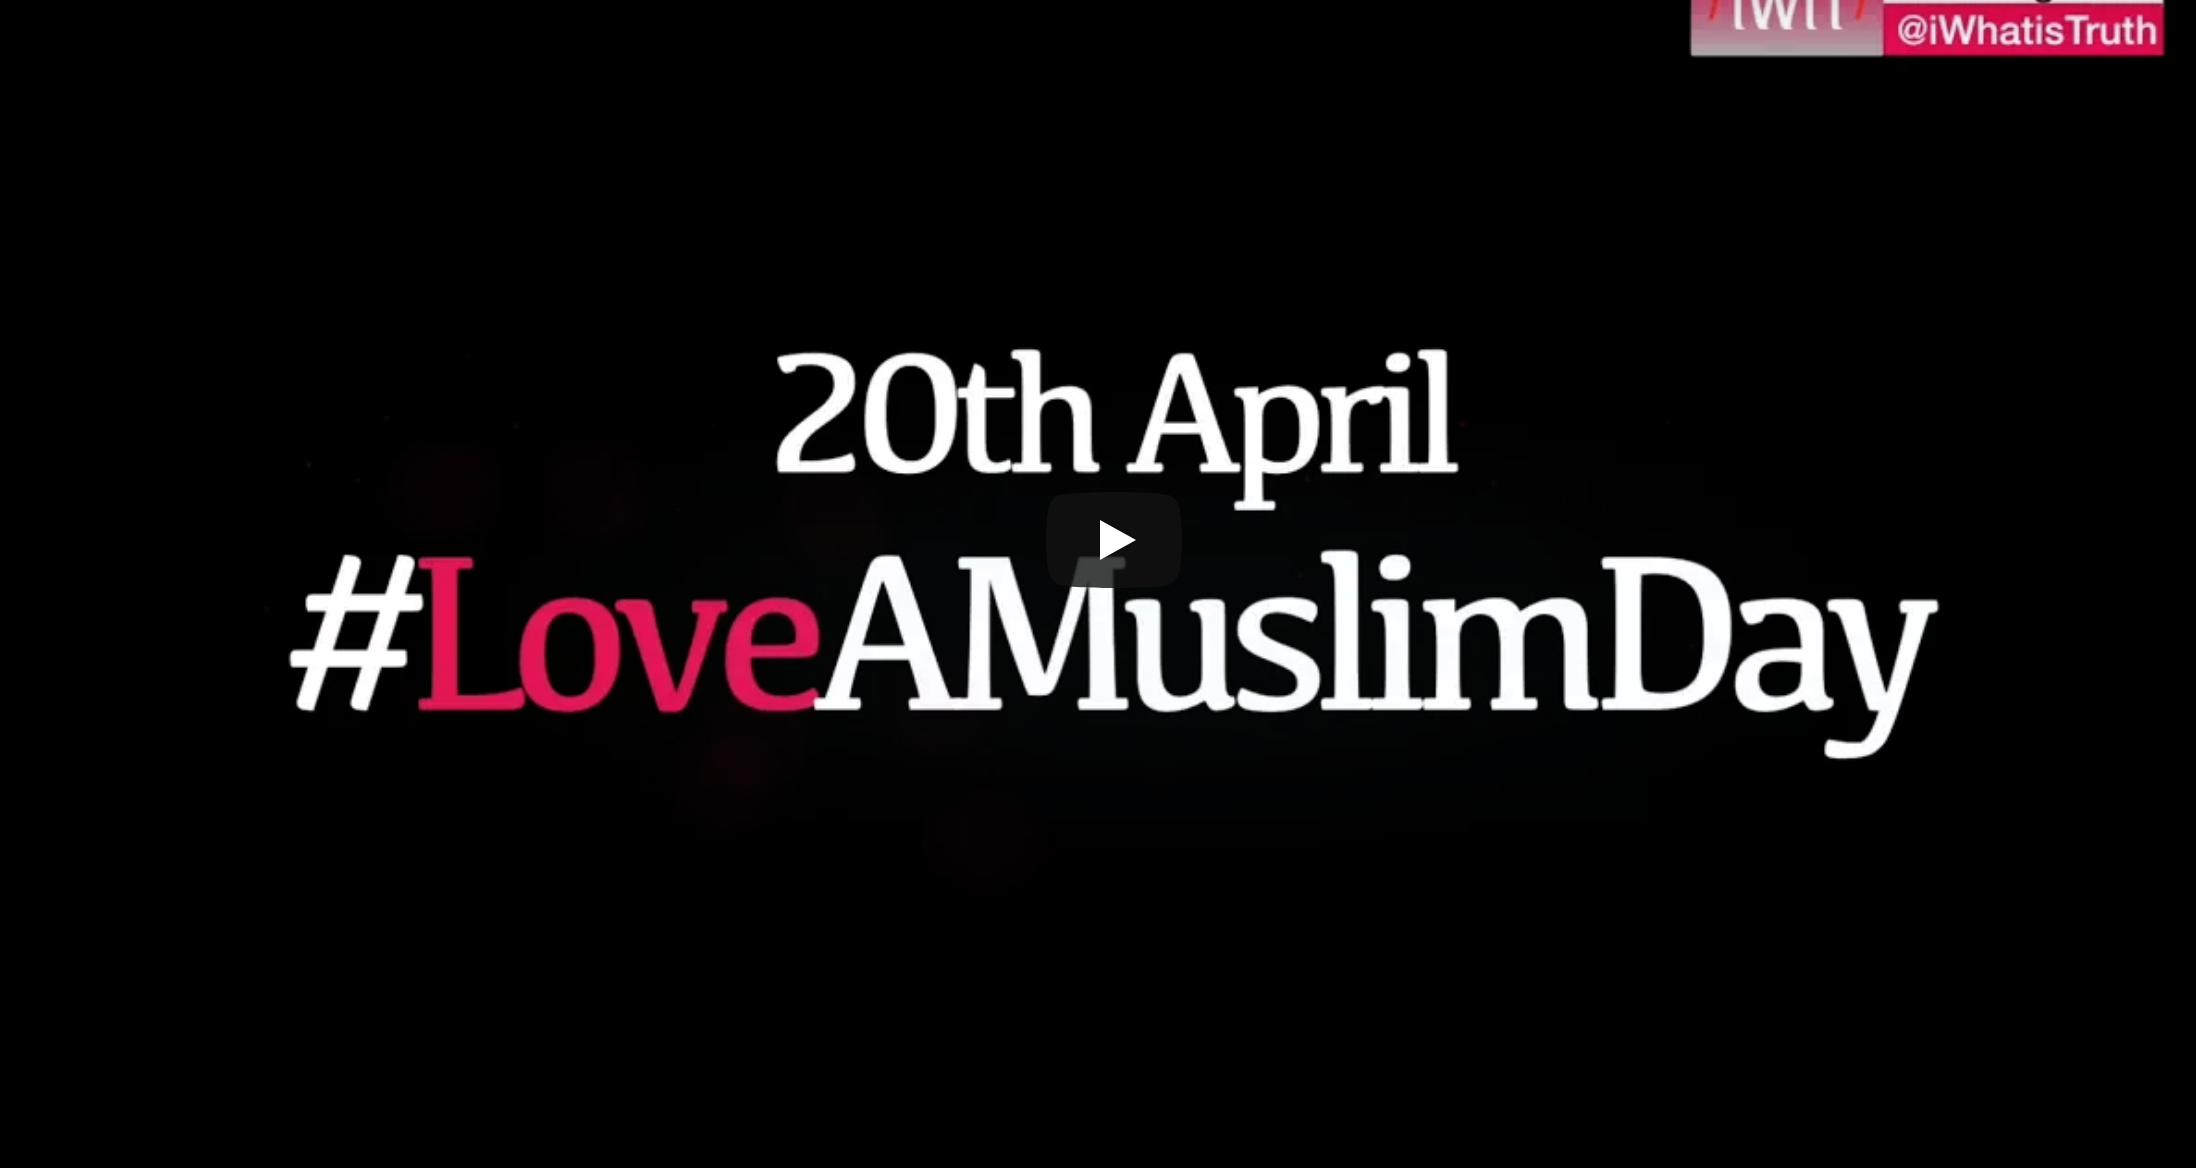 Punish a Muslim Day Respond With Love a Muslim Day on 20th April